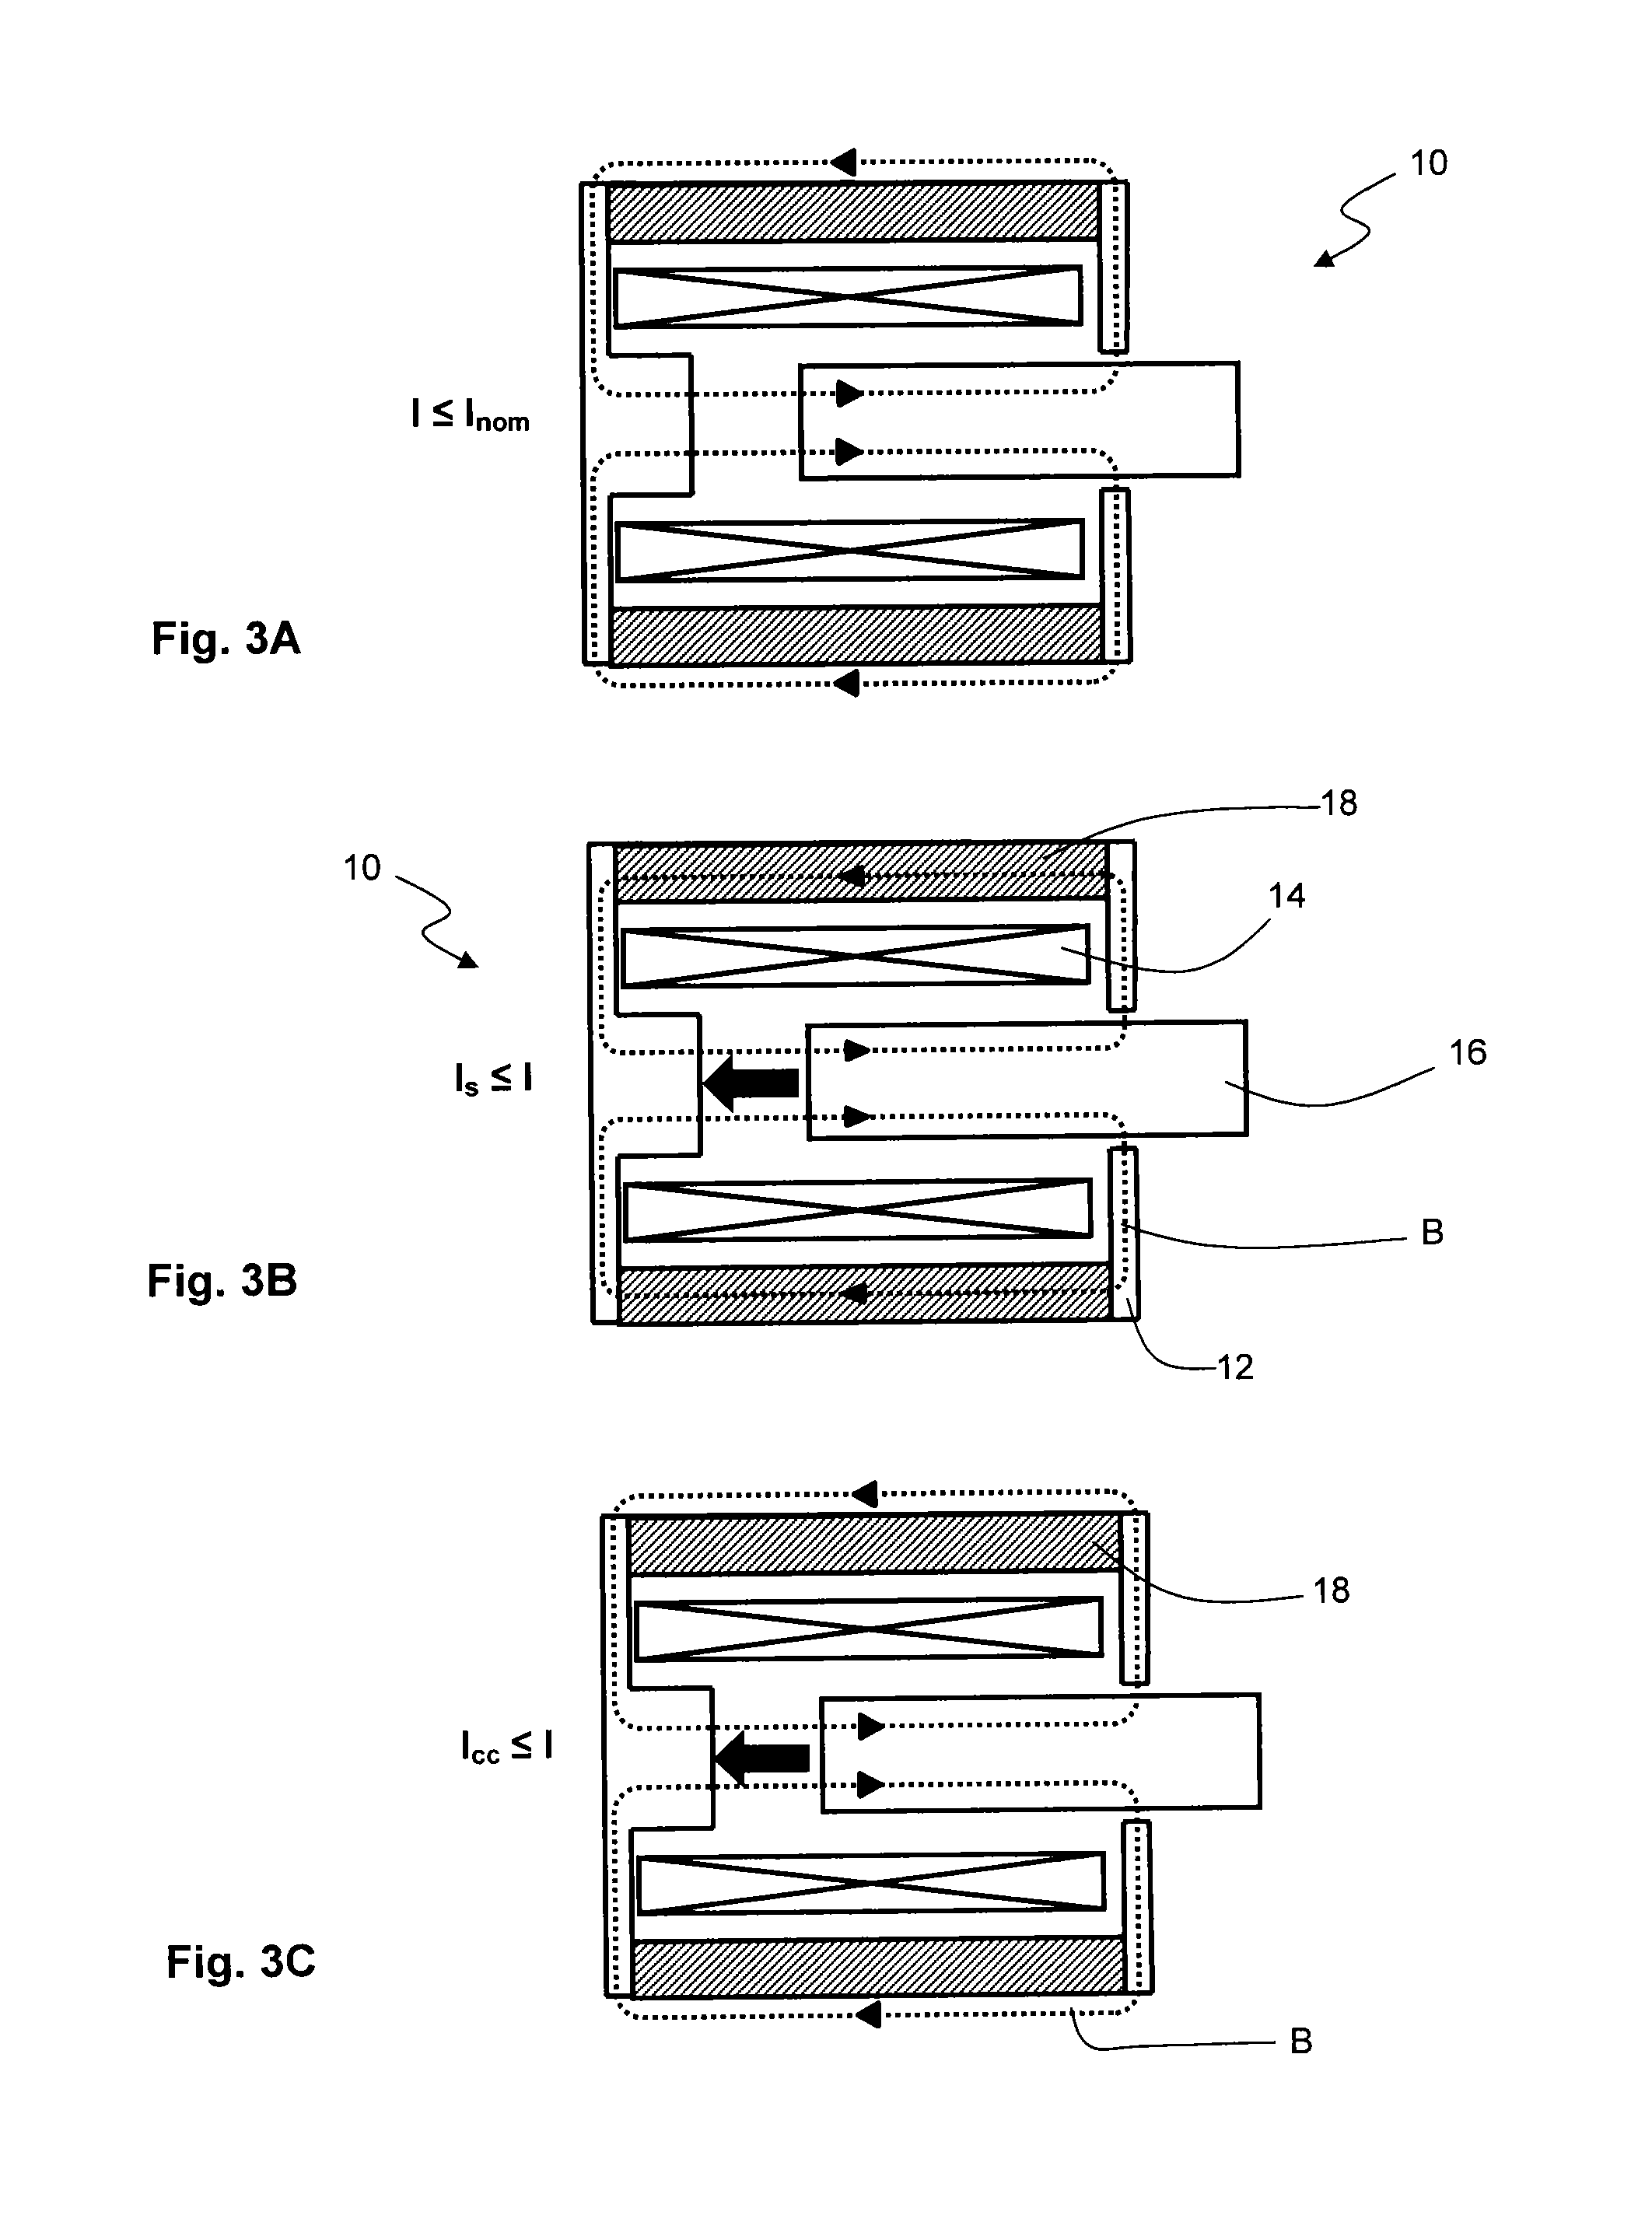 Actuator with thermomagnetic shunt, especially for triggering a circuit breaker